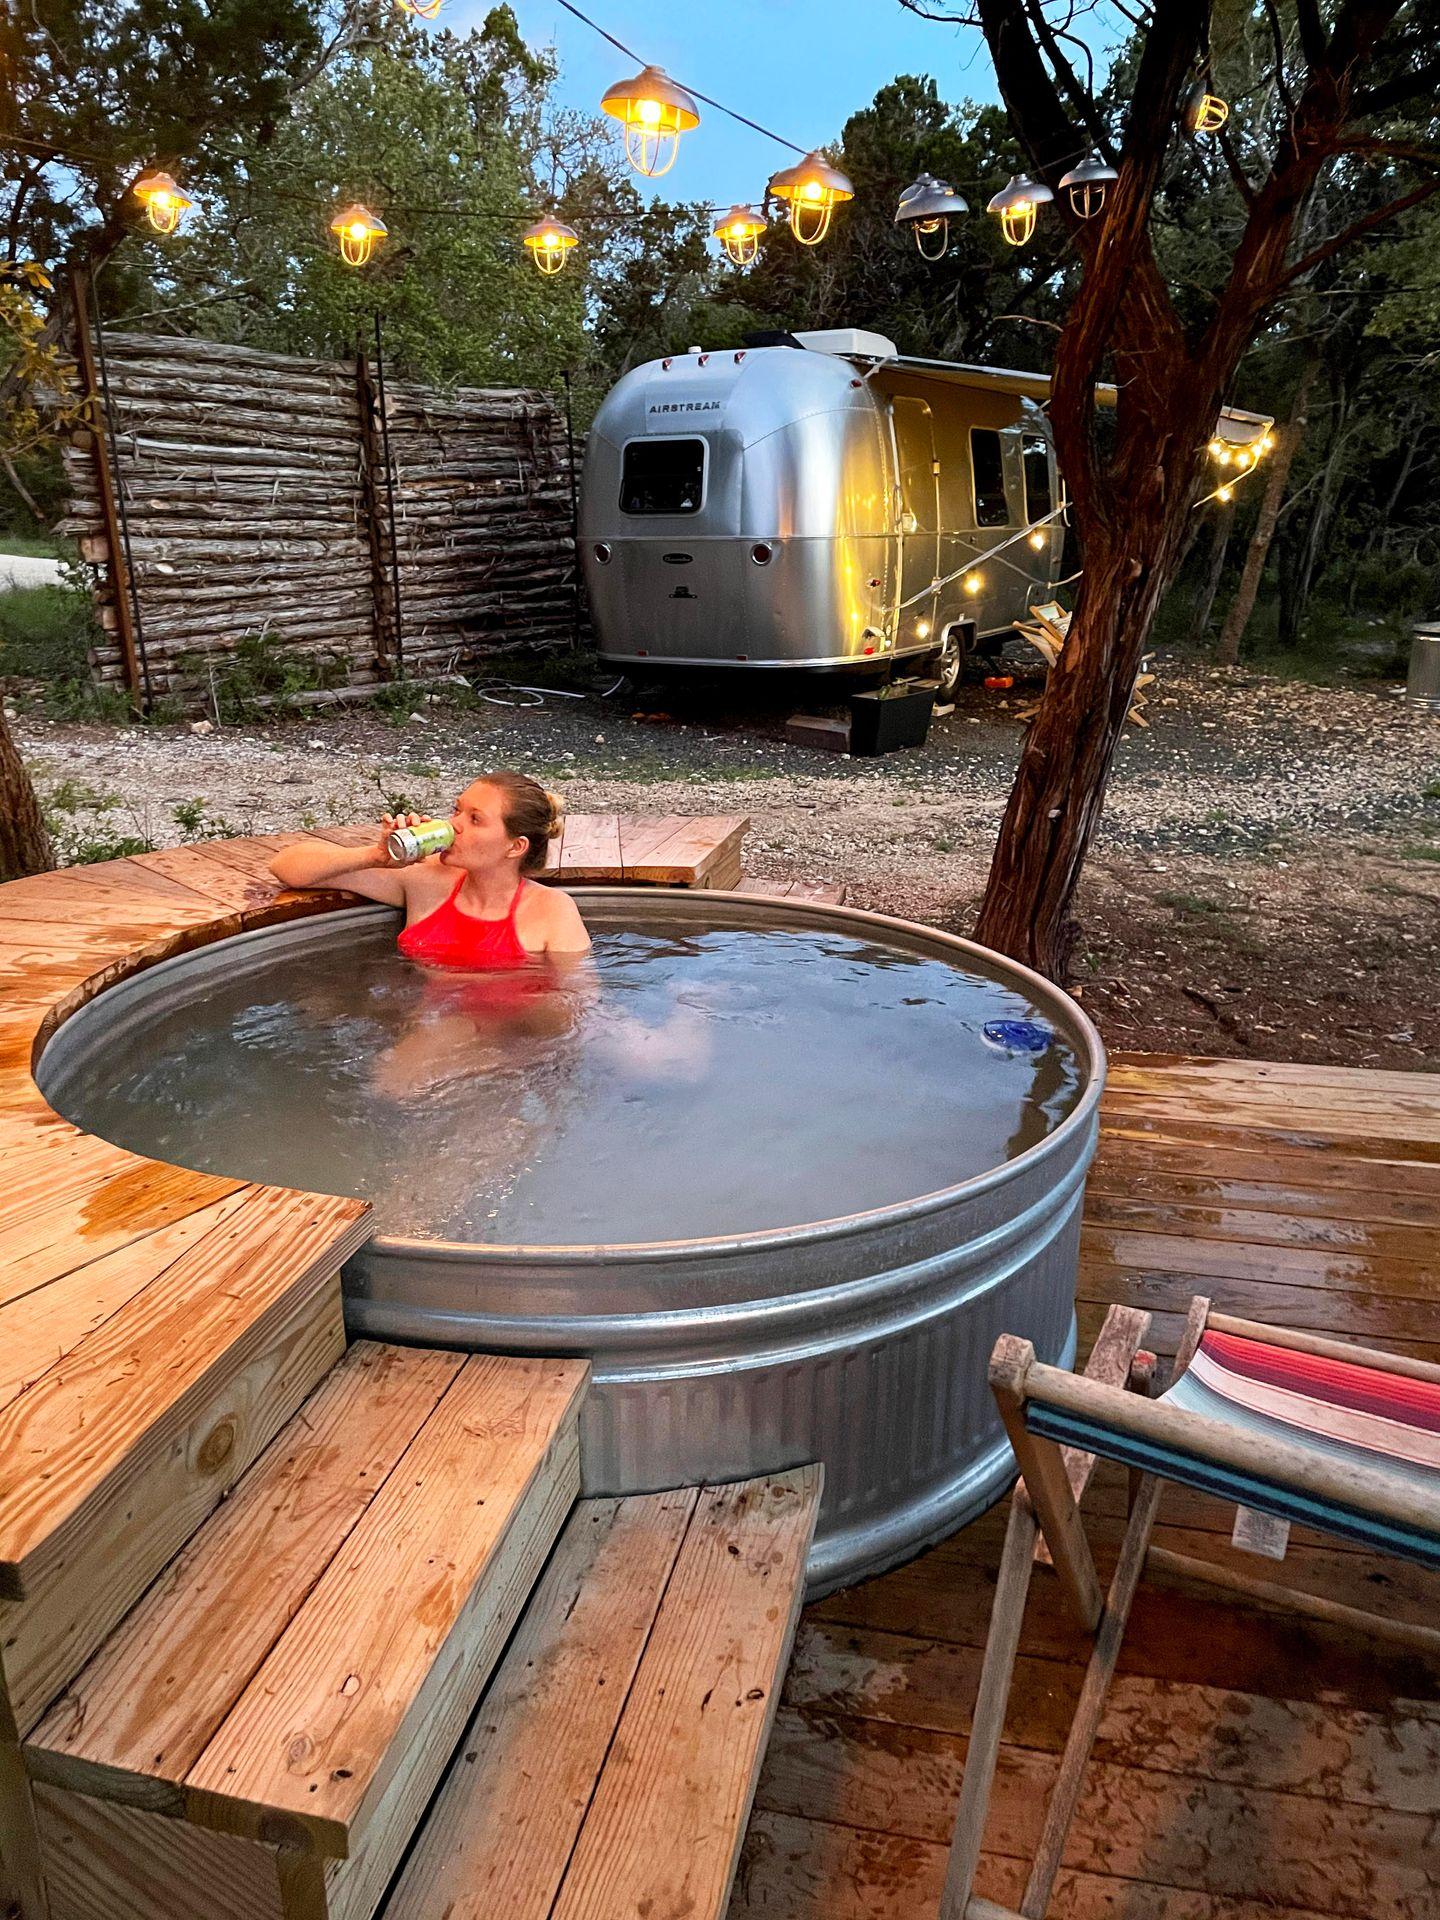 Lydia drinking a beer in the hot tub at the Basecamp airstream in Wimberley, Texas.